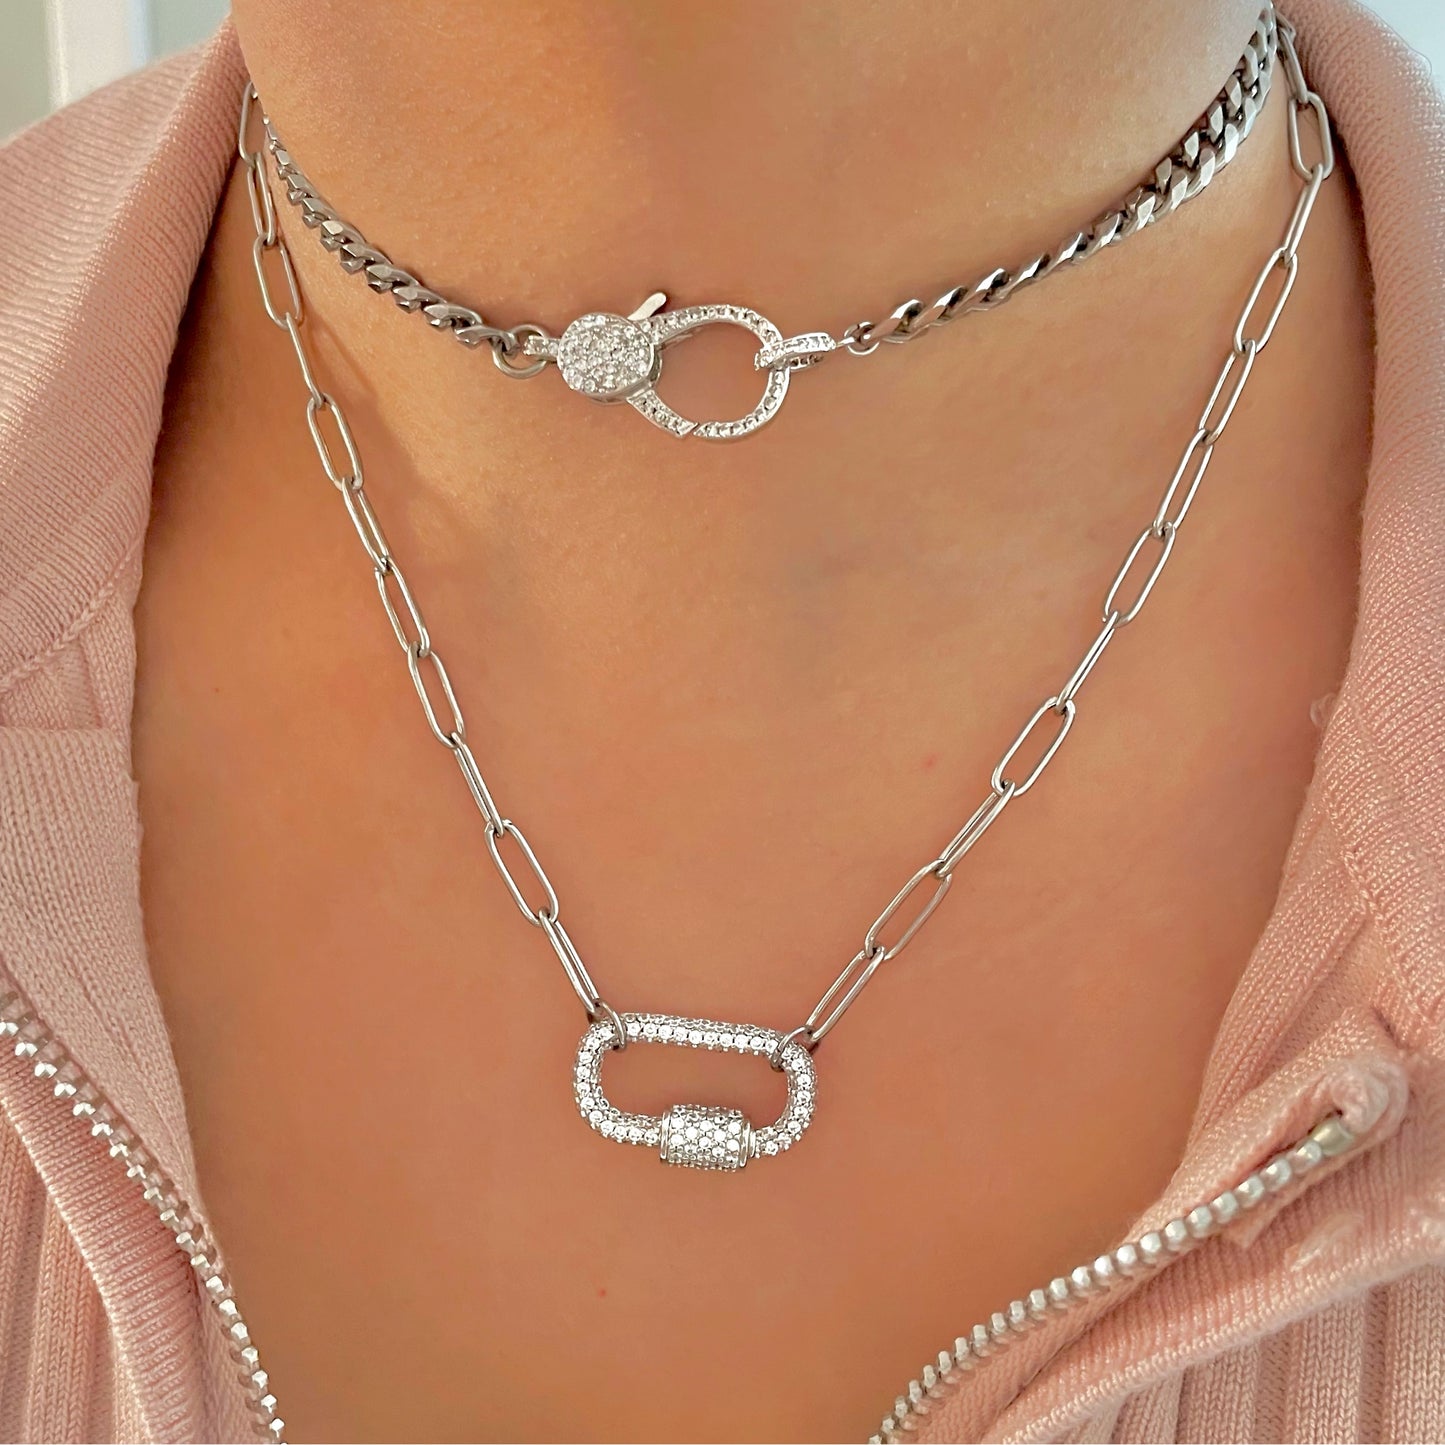 Crystal Clasp Chains SILVER